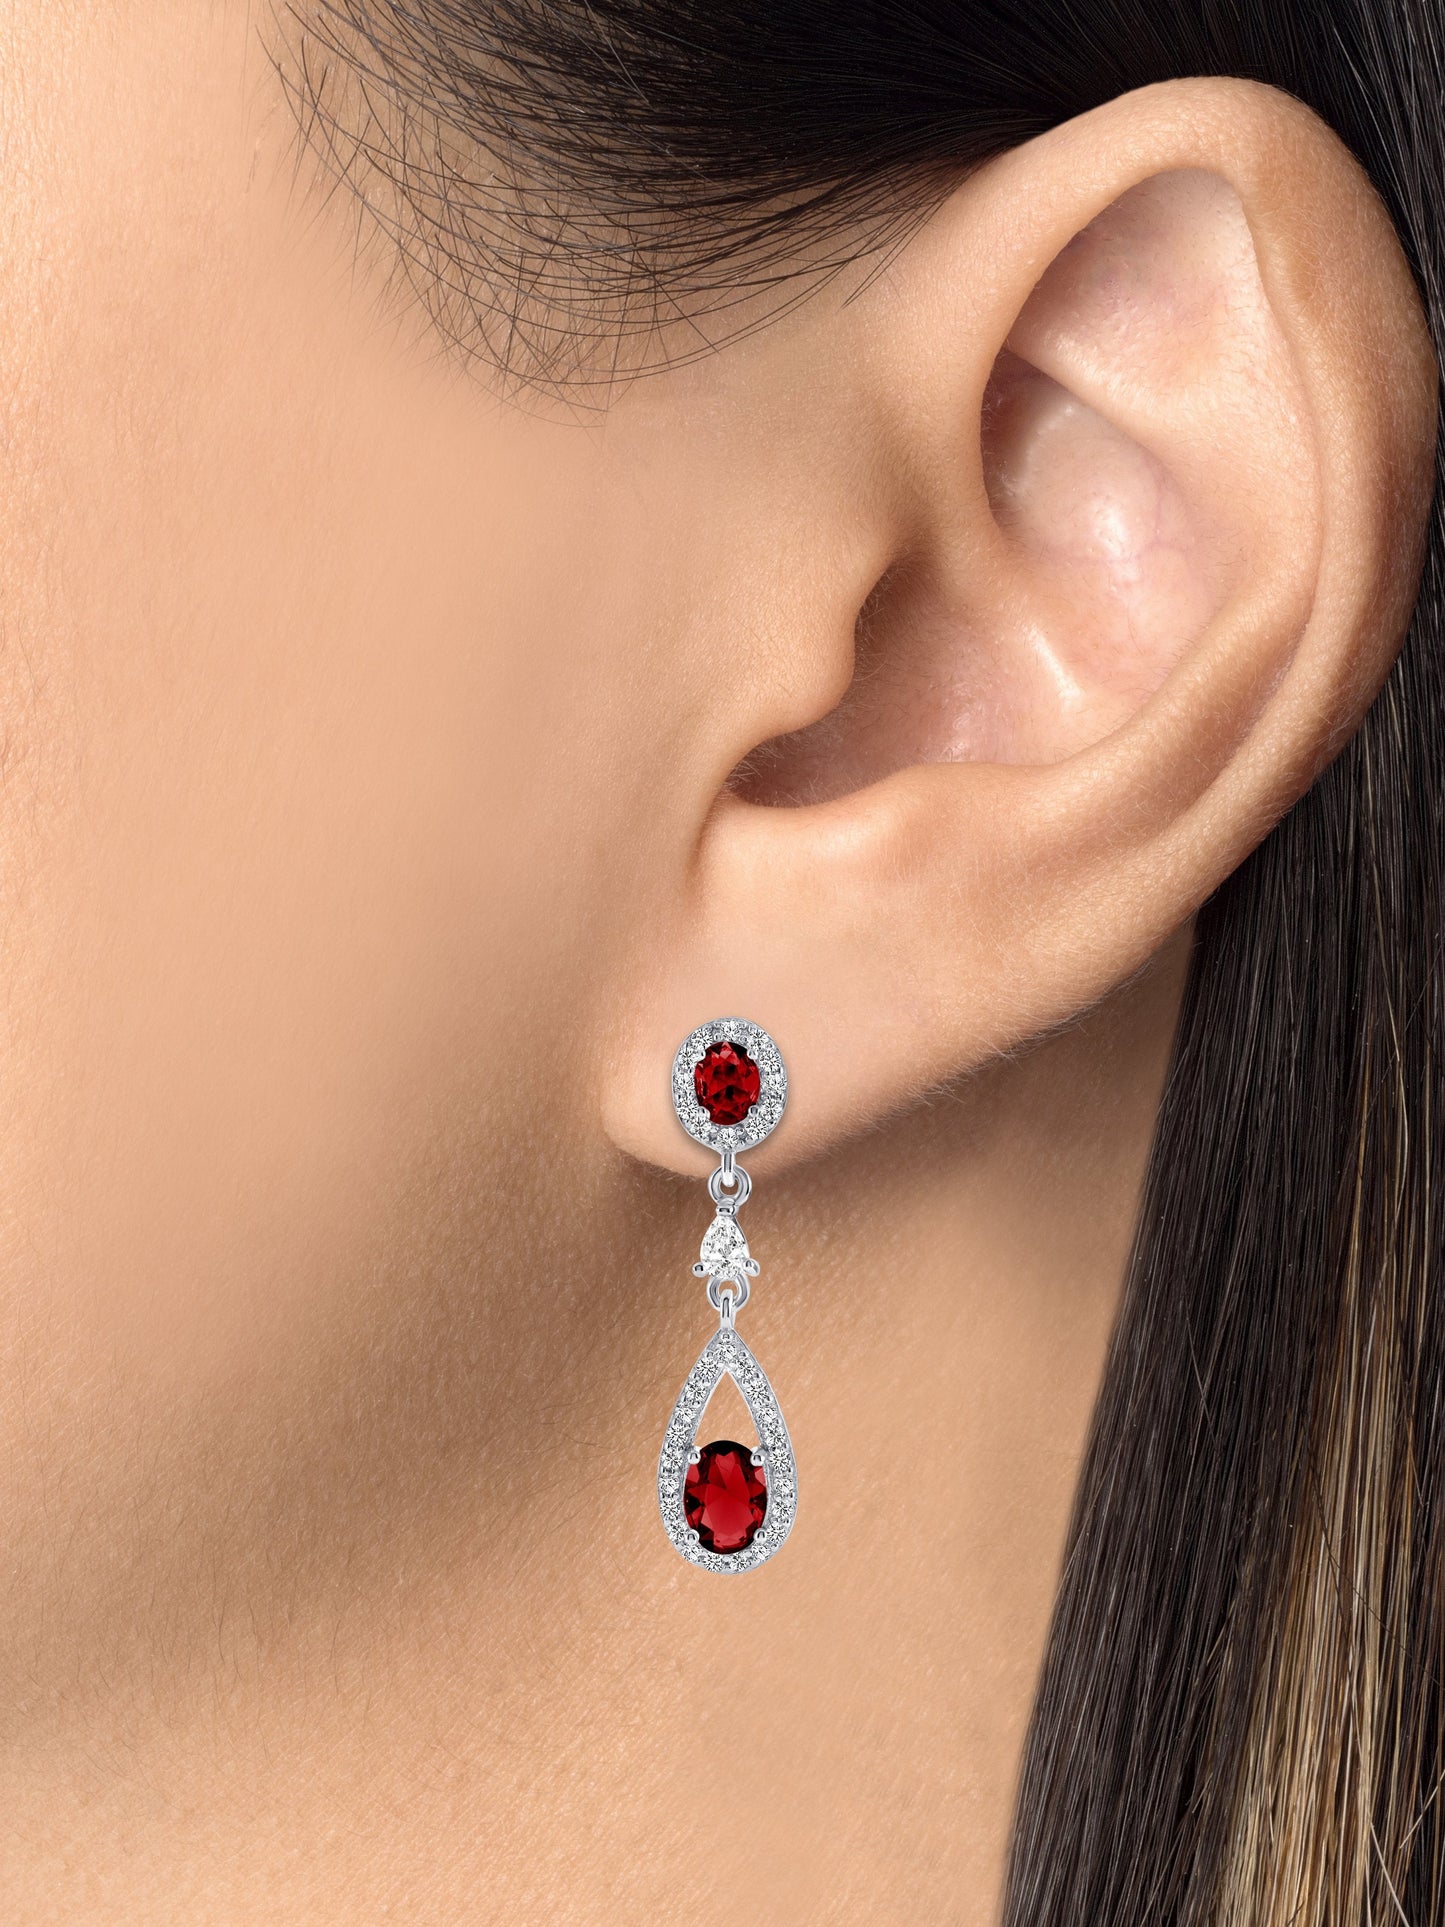 Silver 925 Rhodium Plated Dangling Red Cubic Zirconia Earrings. DGE1008RED